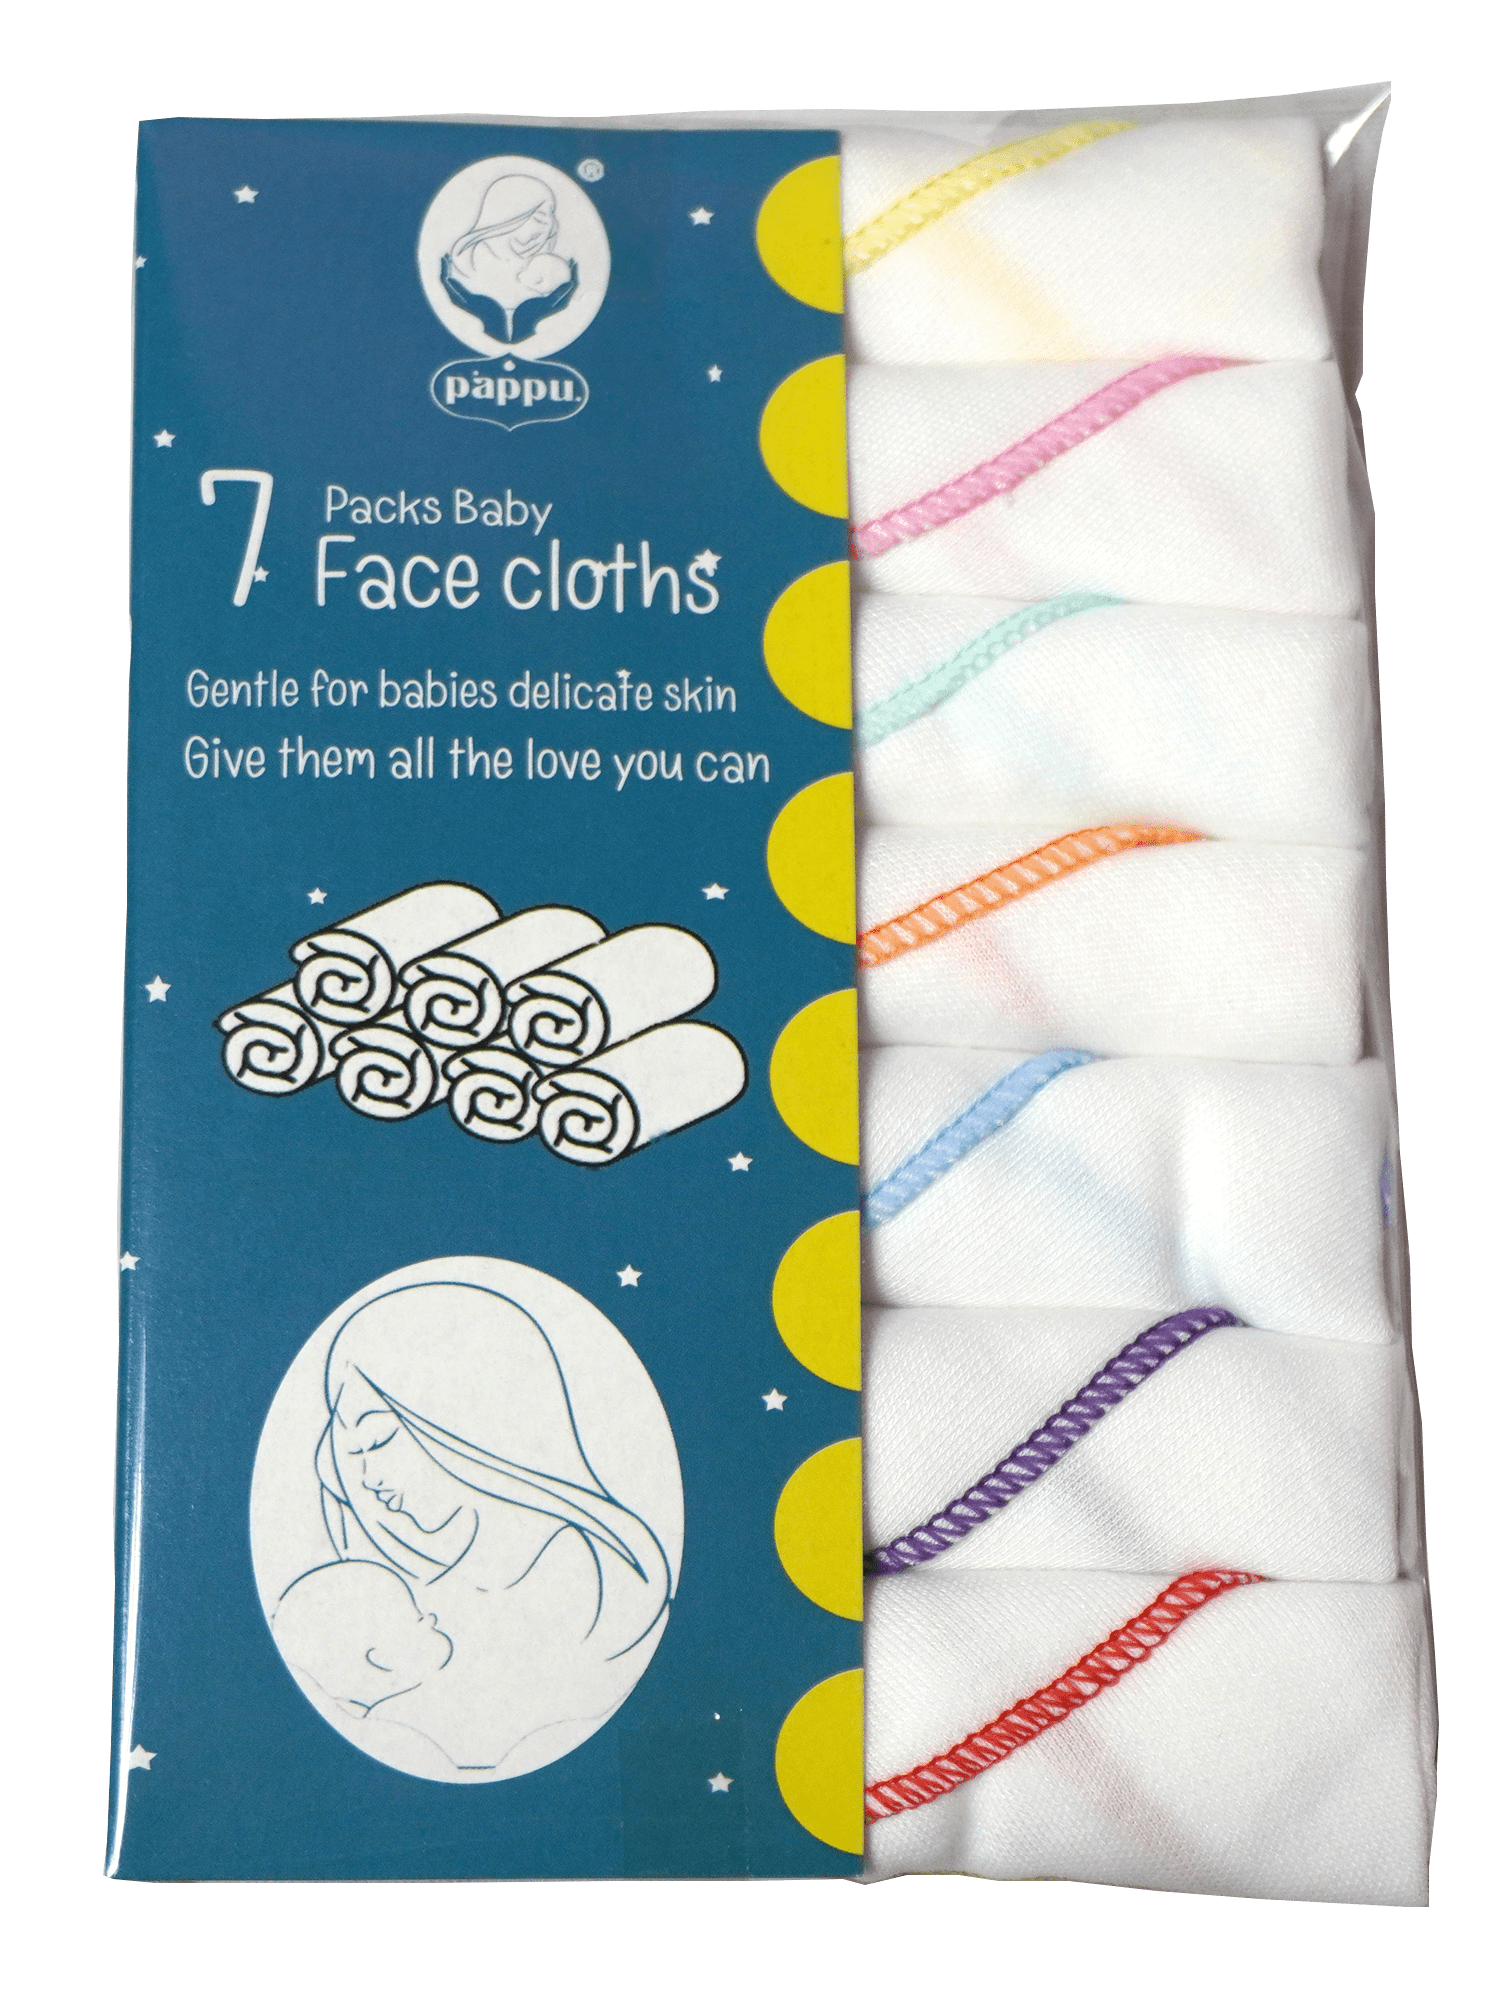 Pappu 7 Piece Interlock Face Cloths Sew The Edge Mix Color In Pack